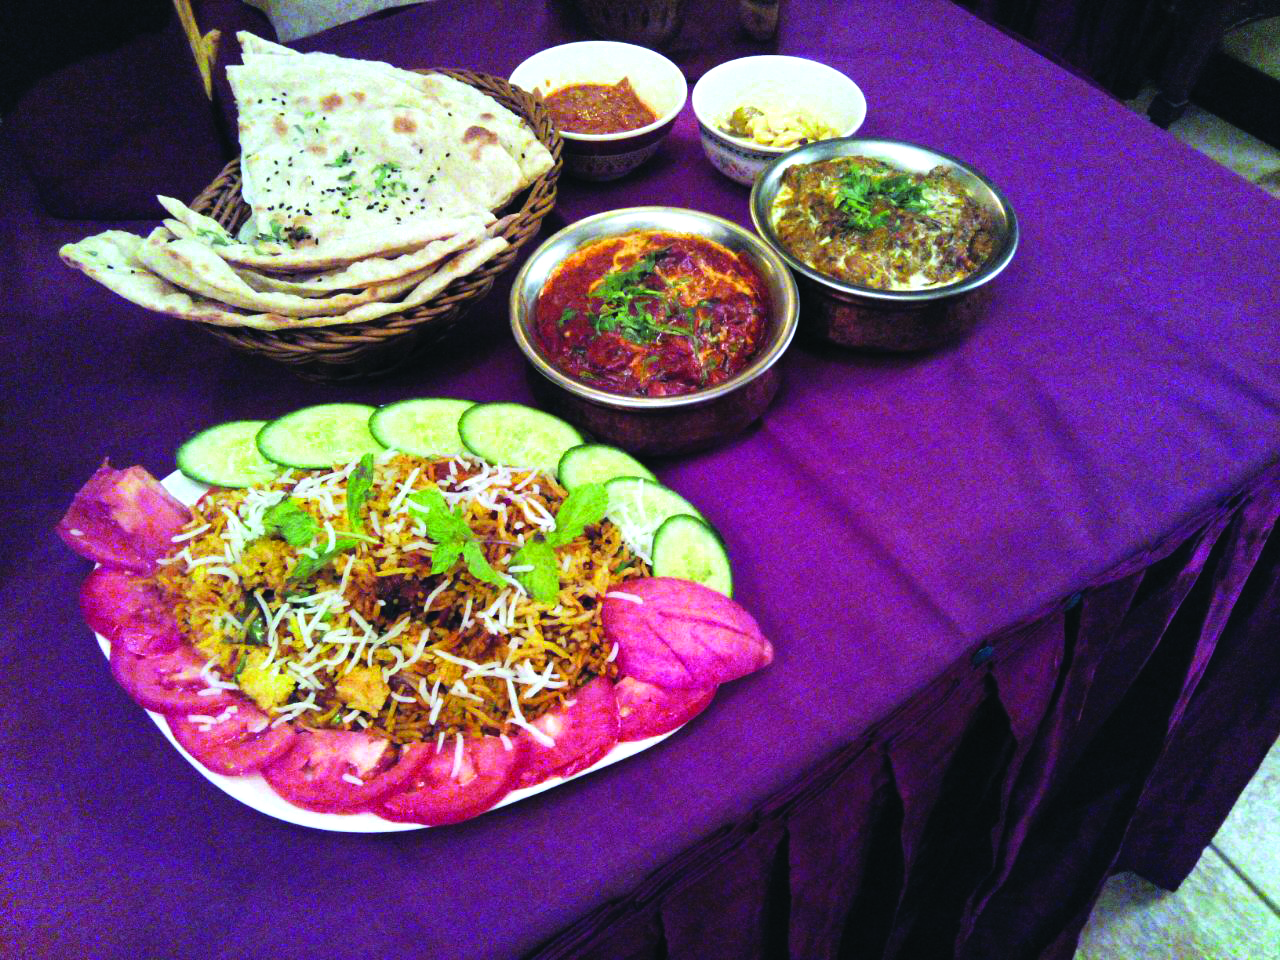 Oman Dining: This weekend eat at Khyber